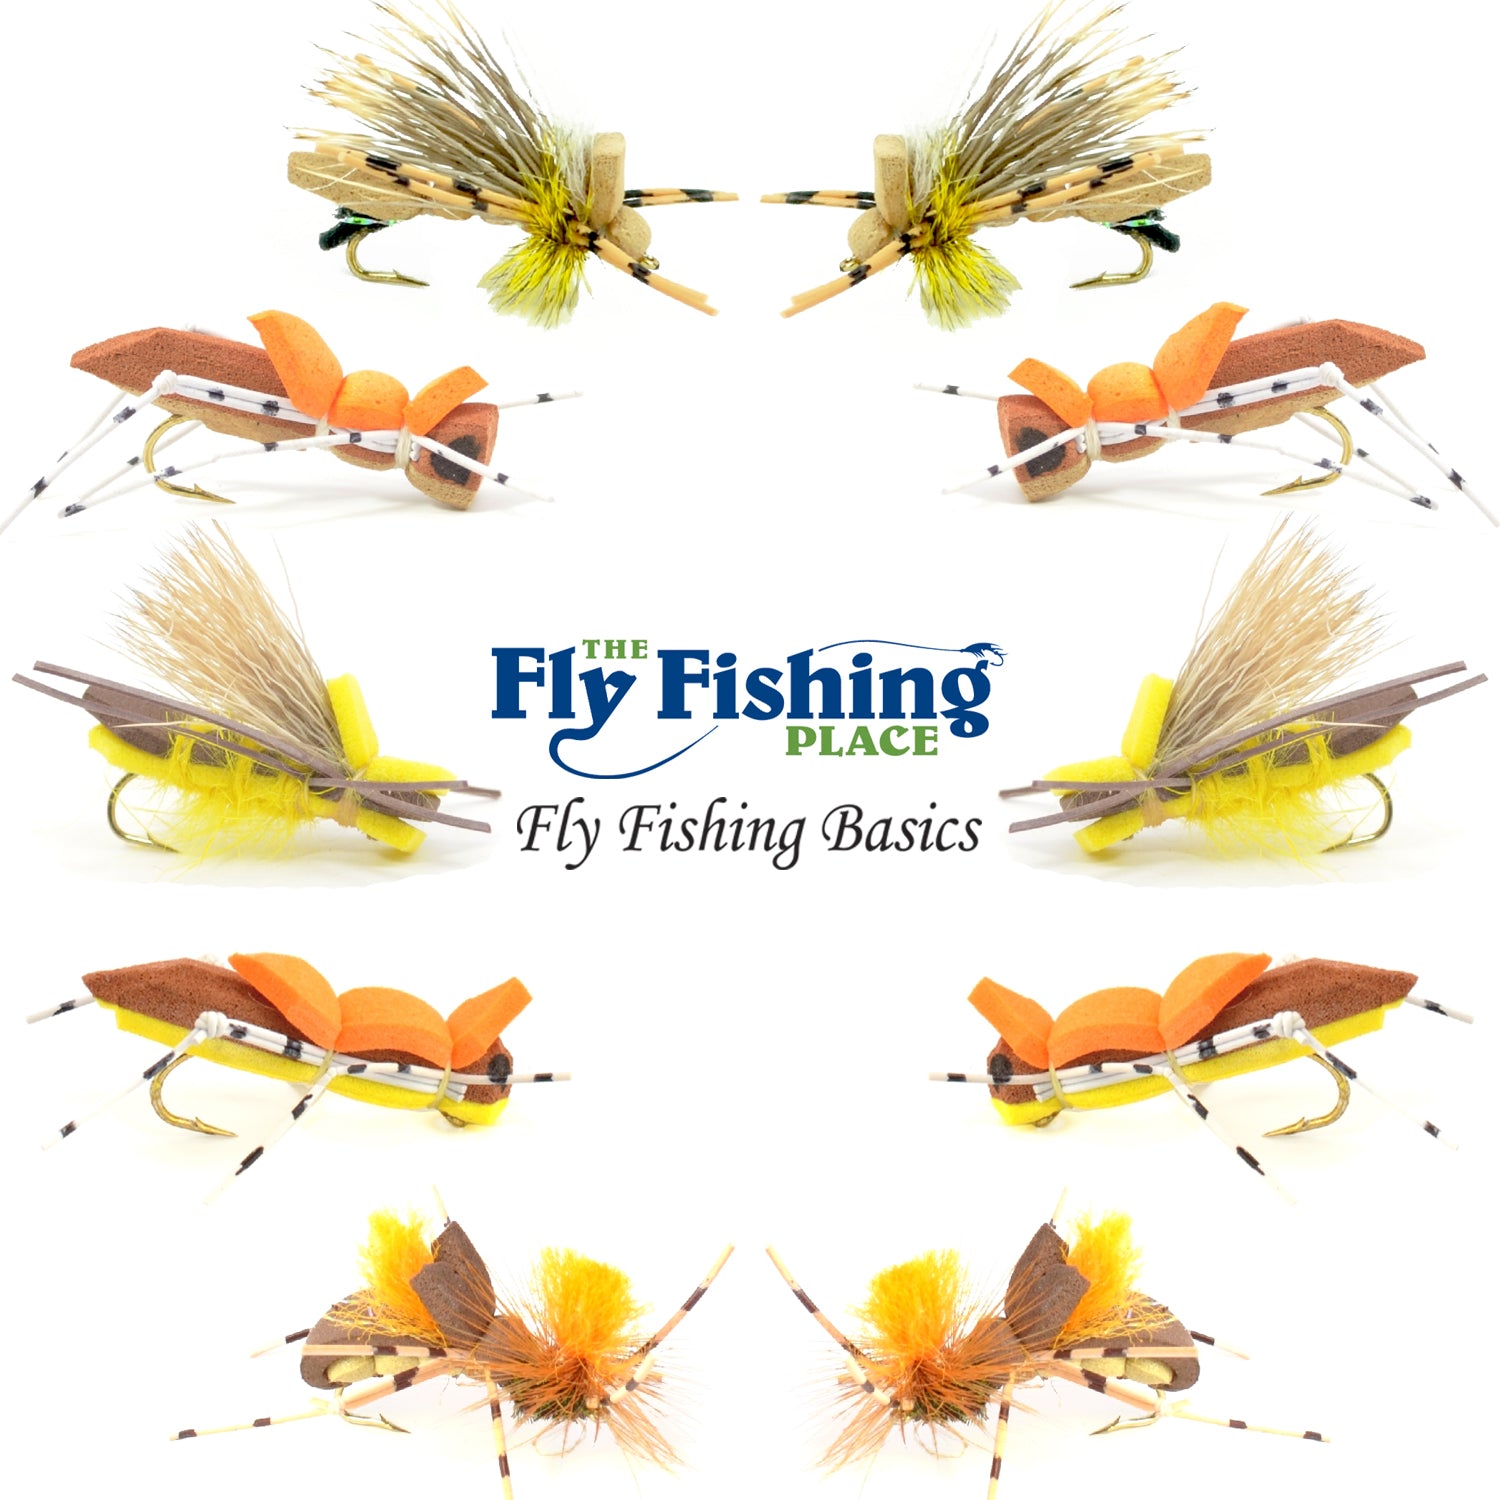 Basics Collection - Foam Hoppers Dry Fly Assortment - 10 Dry Fishing Grasshopper Flies - 5 Patterns - Hook Size 10